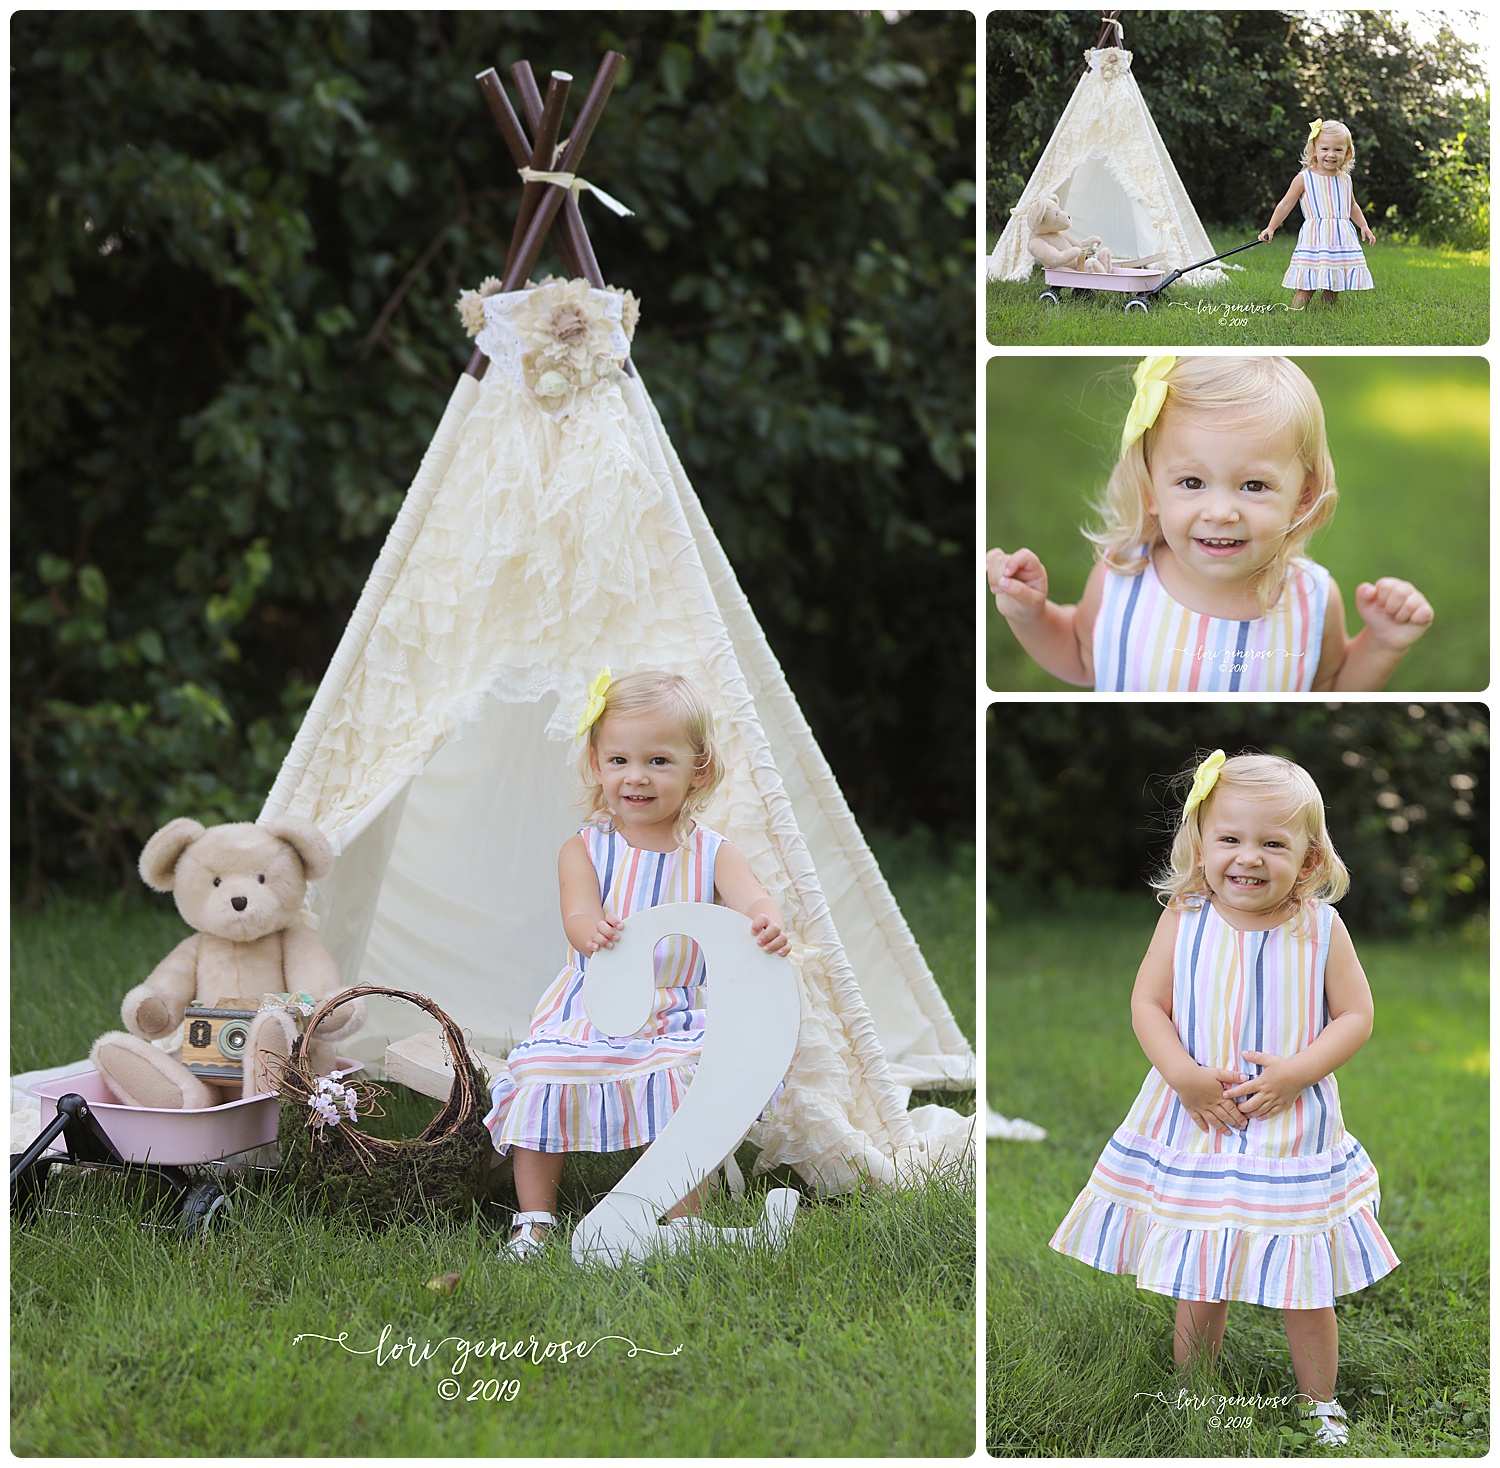 Allie is such a happy little two year old and the cutest friend… such a fun session!